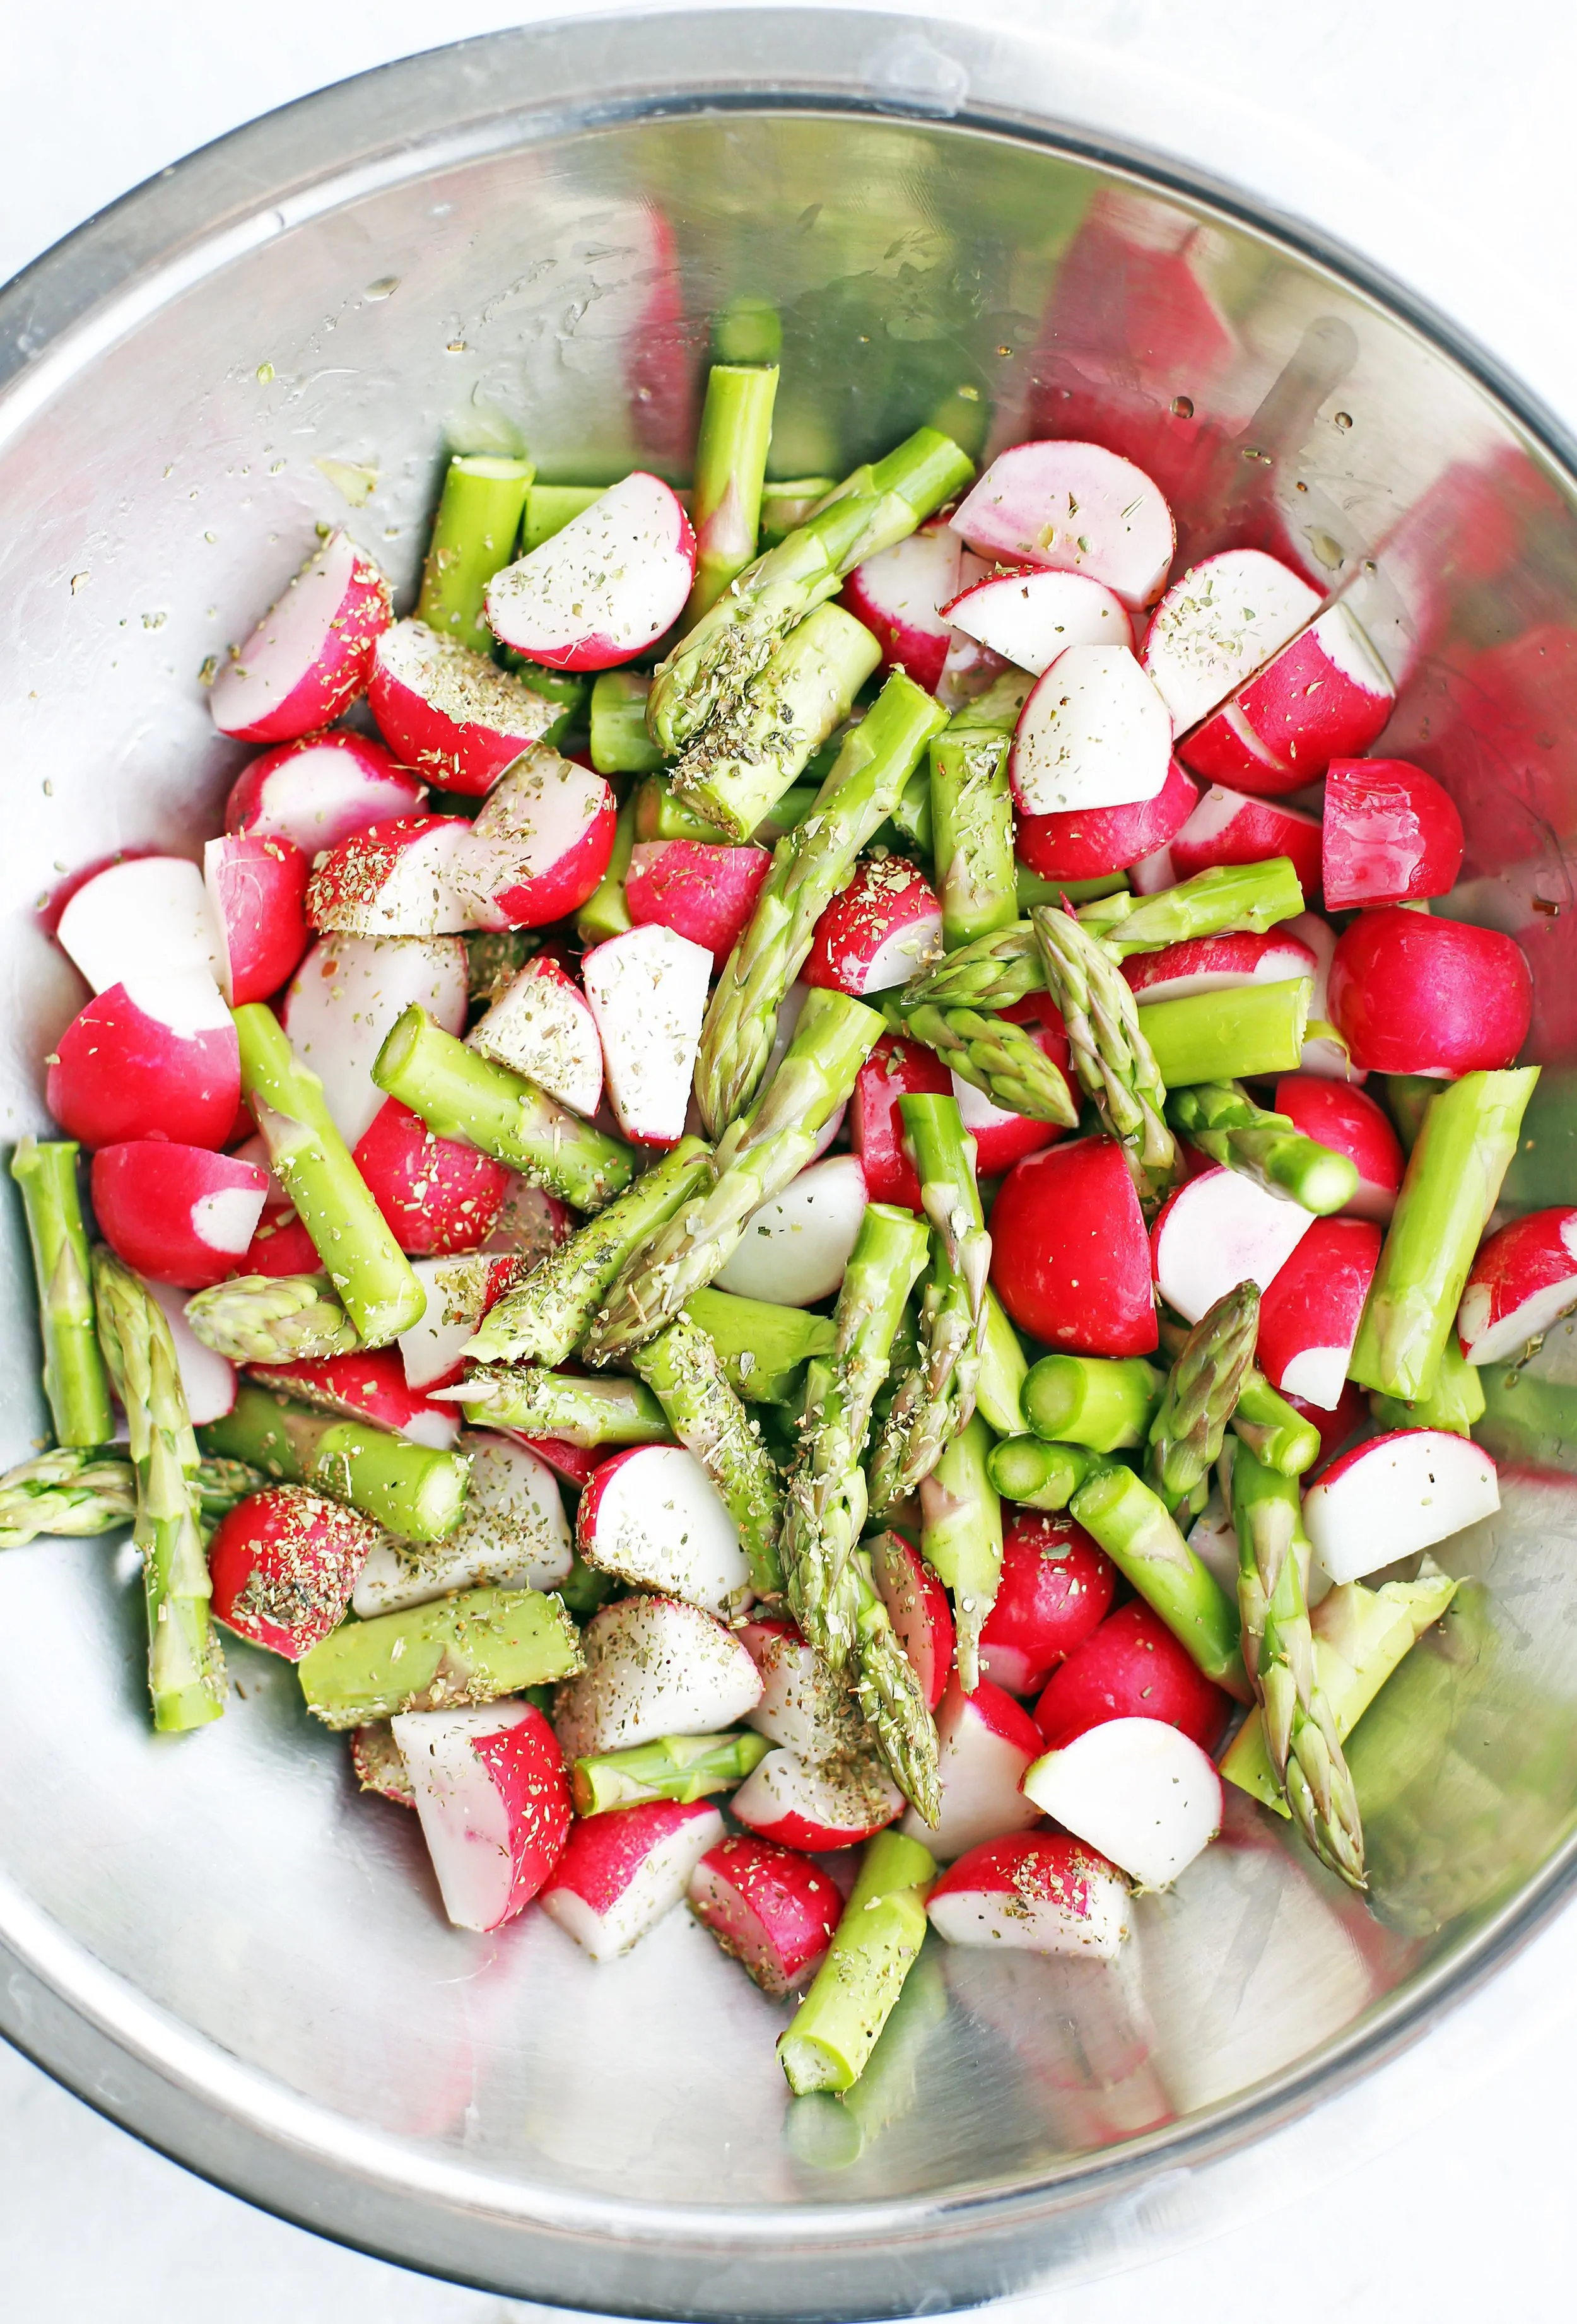 Roasted Radishes & Asparagus with Sage and Chives - Naked Cuisine